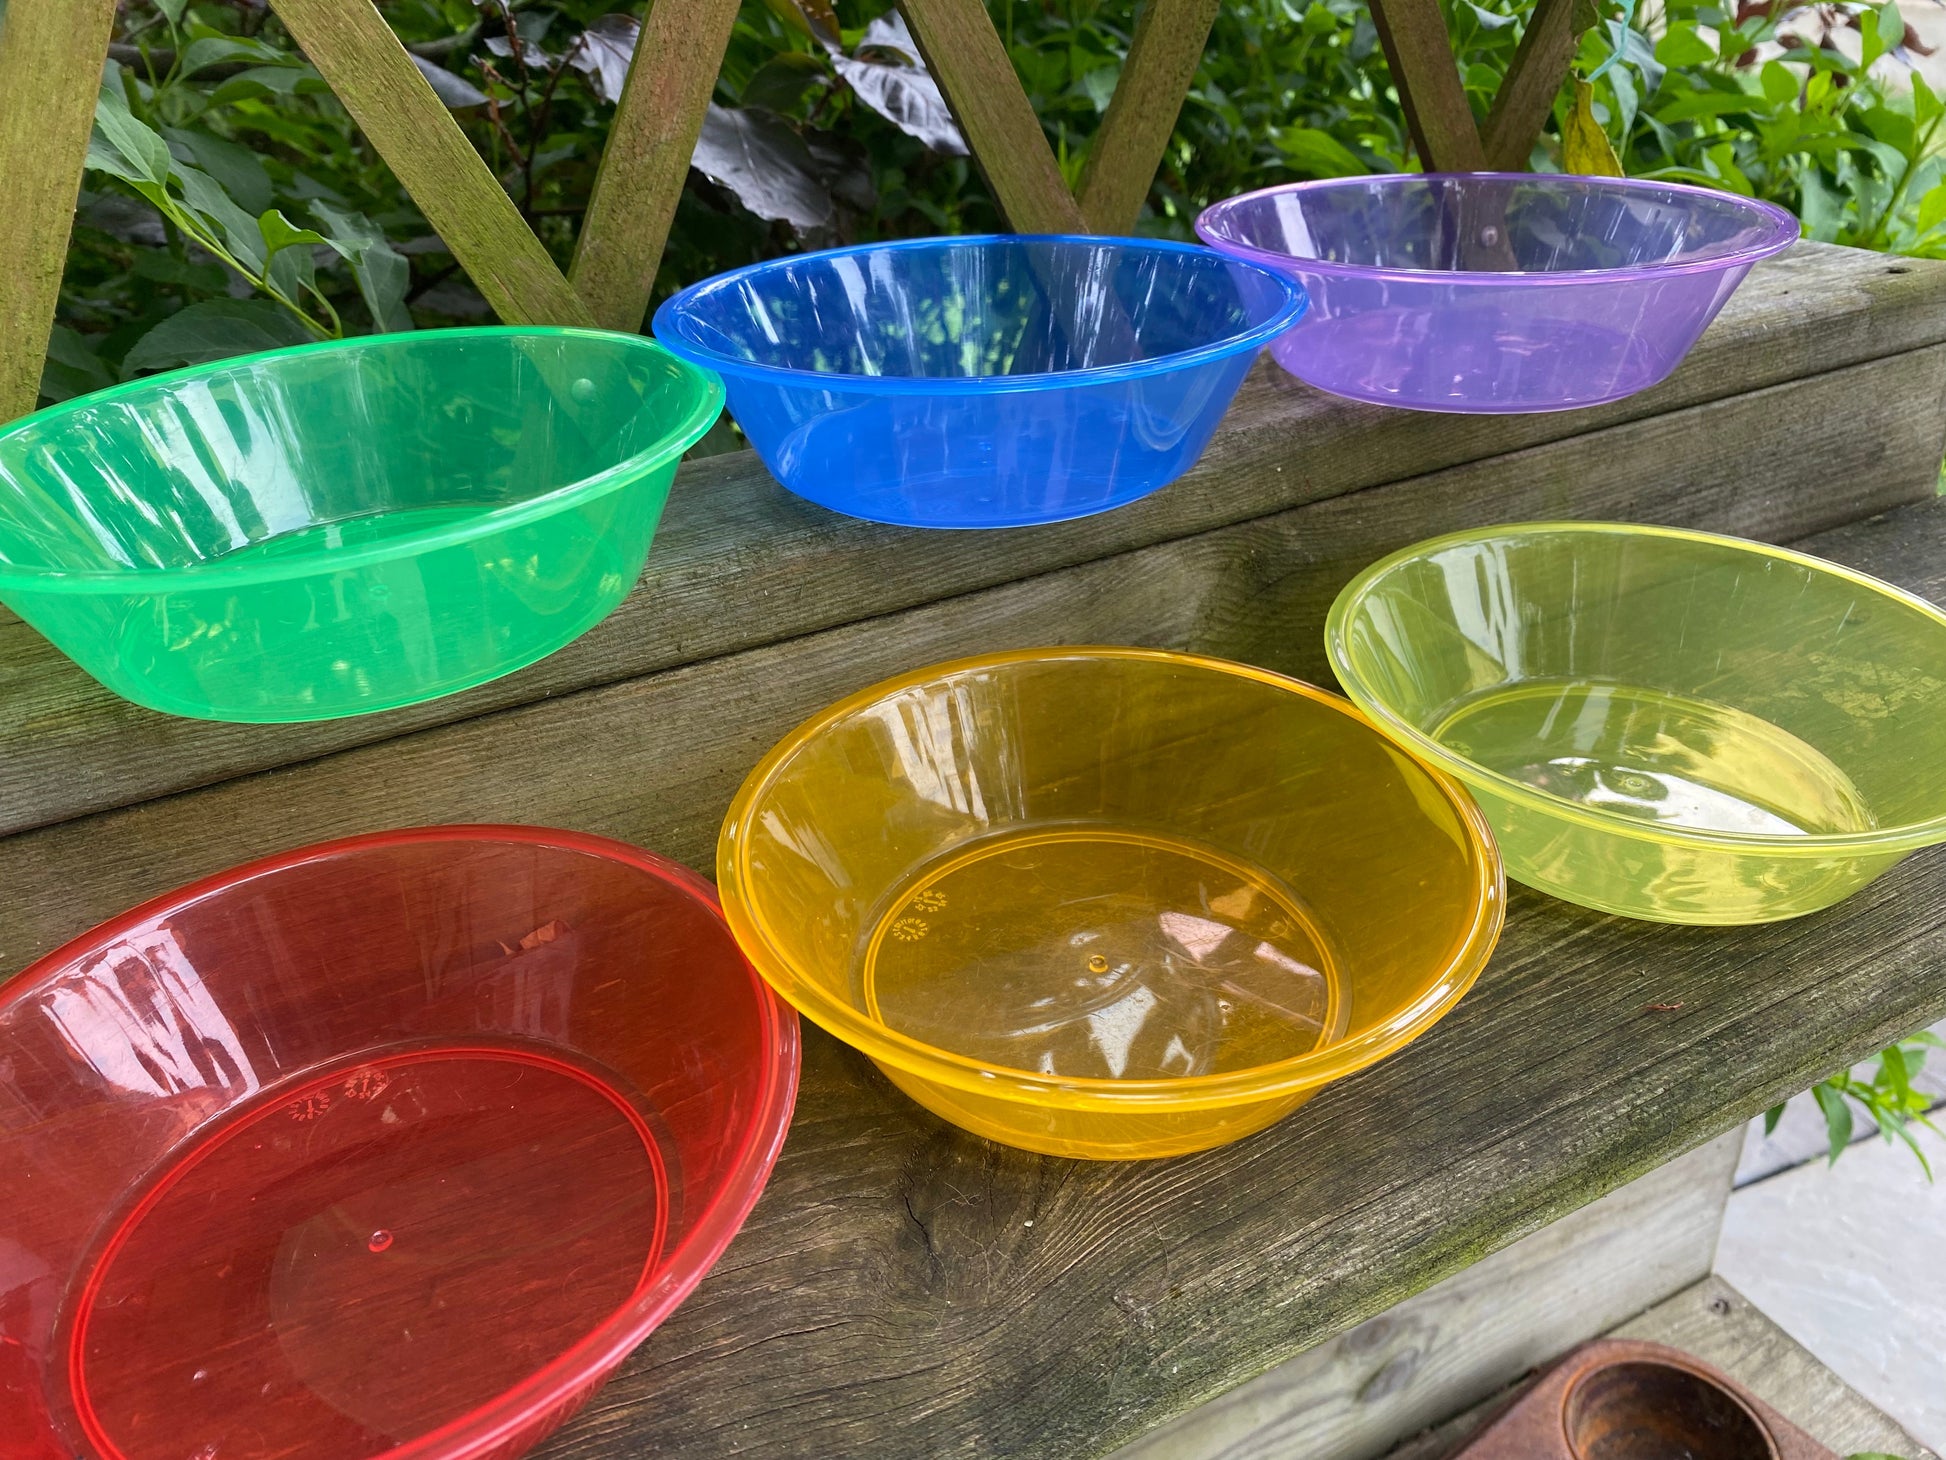 Translucent Colour Bowls | Learning and Exploring Through Play